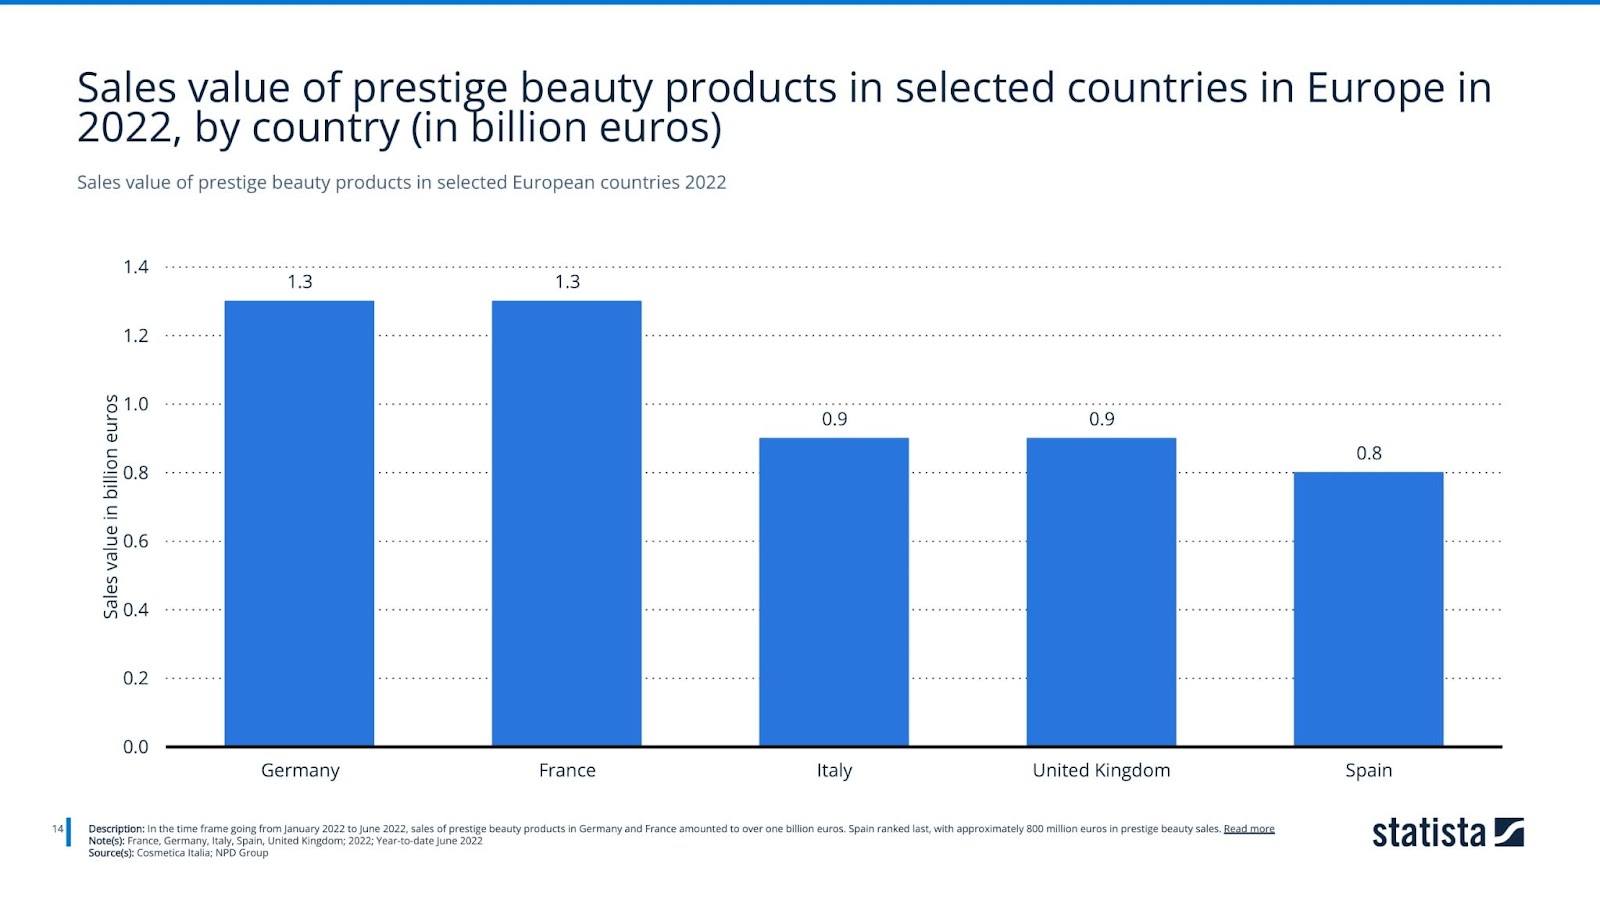 Sales value of prestige beauty products in selected European countries 2022